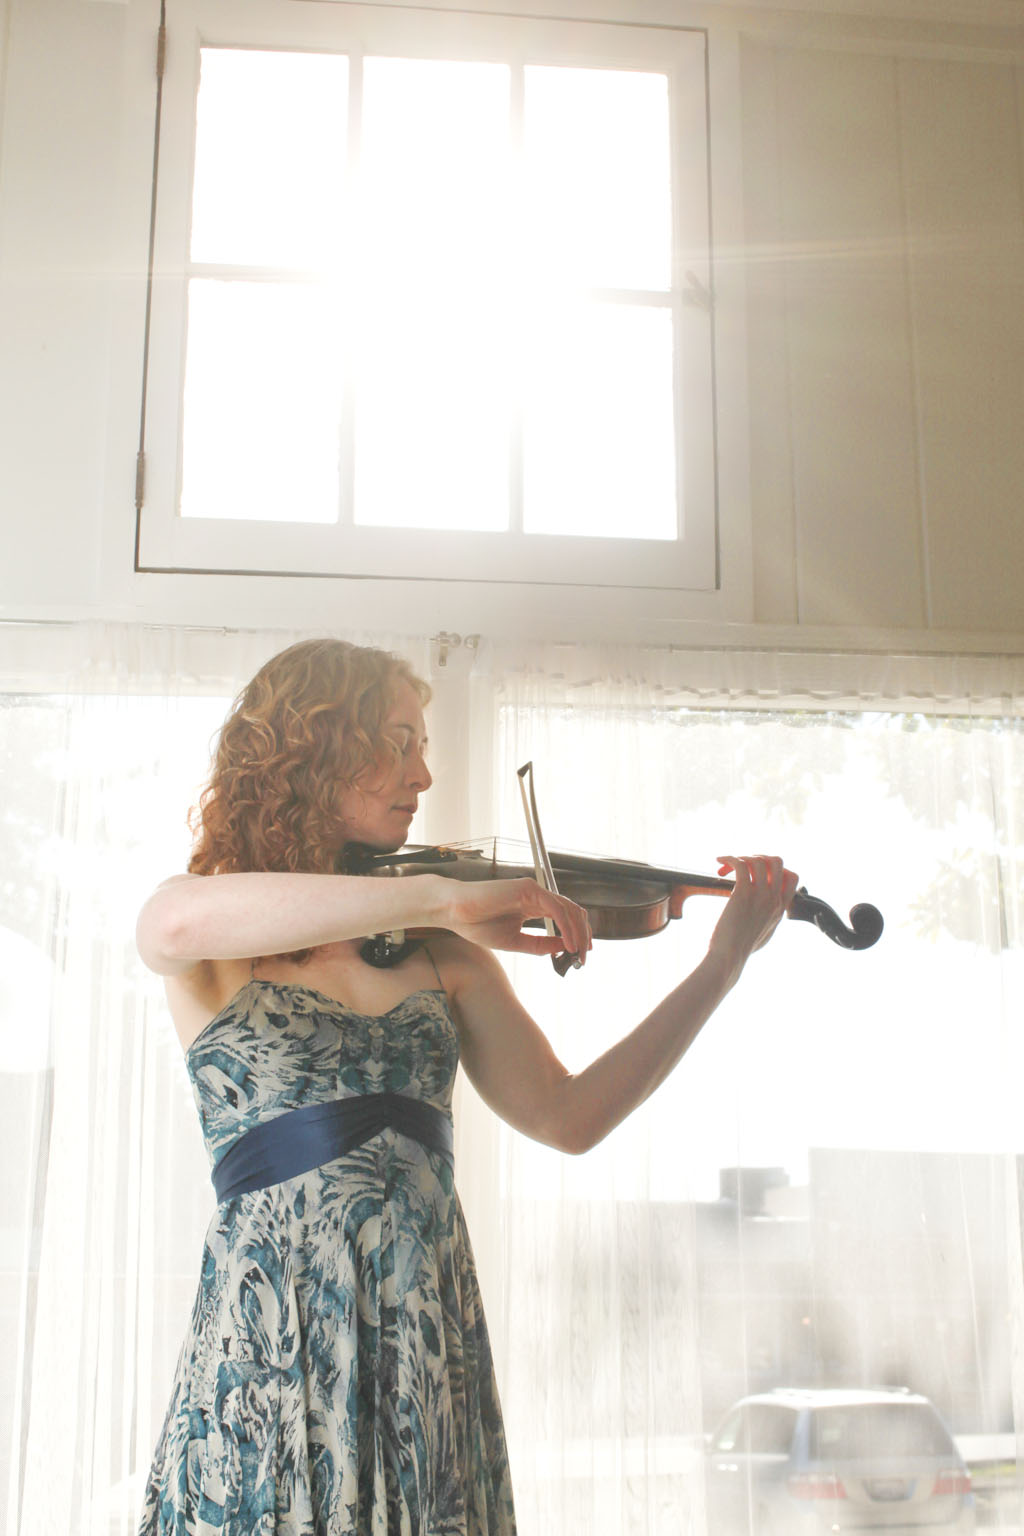 Violinist Laurel Thomsen performing infront of a bright window